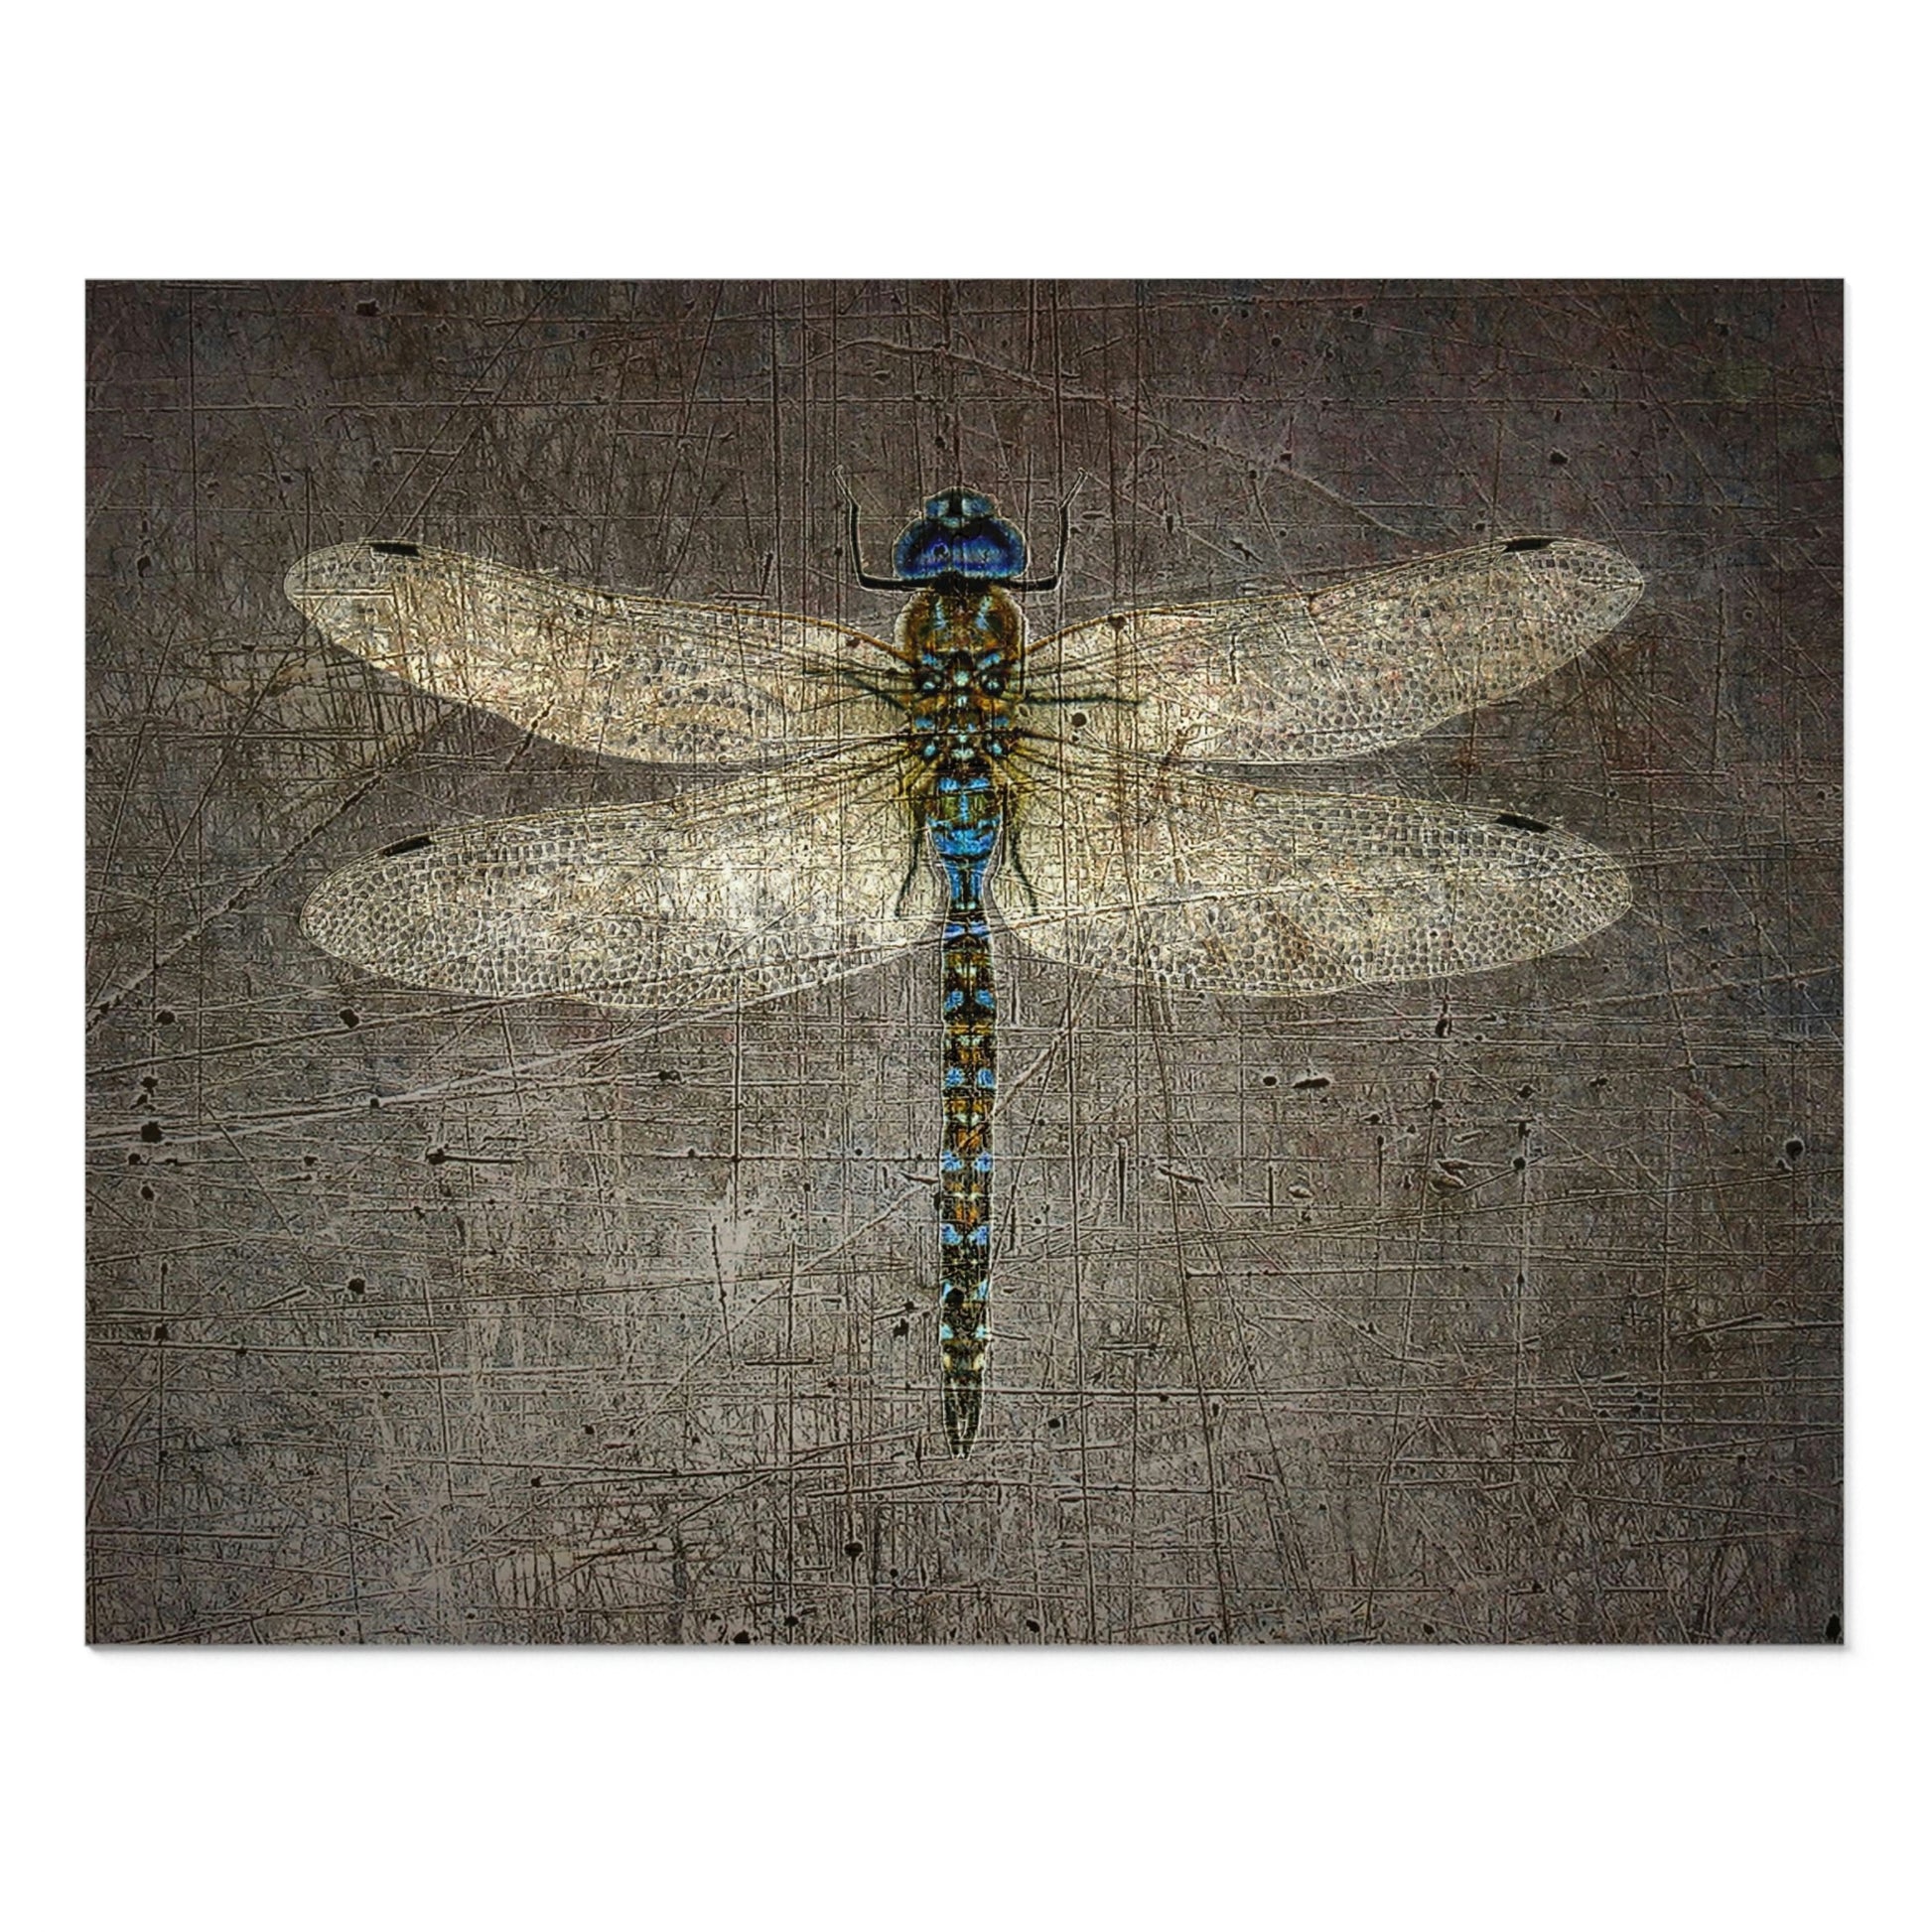 Dragonfly on Distressed Granite Background Puzzle 250 pieces